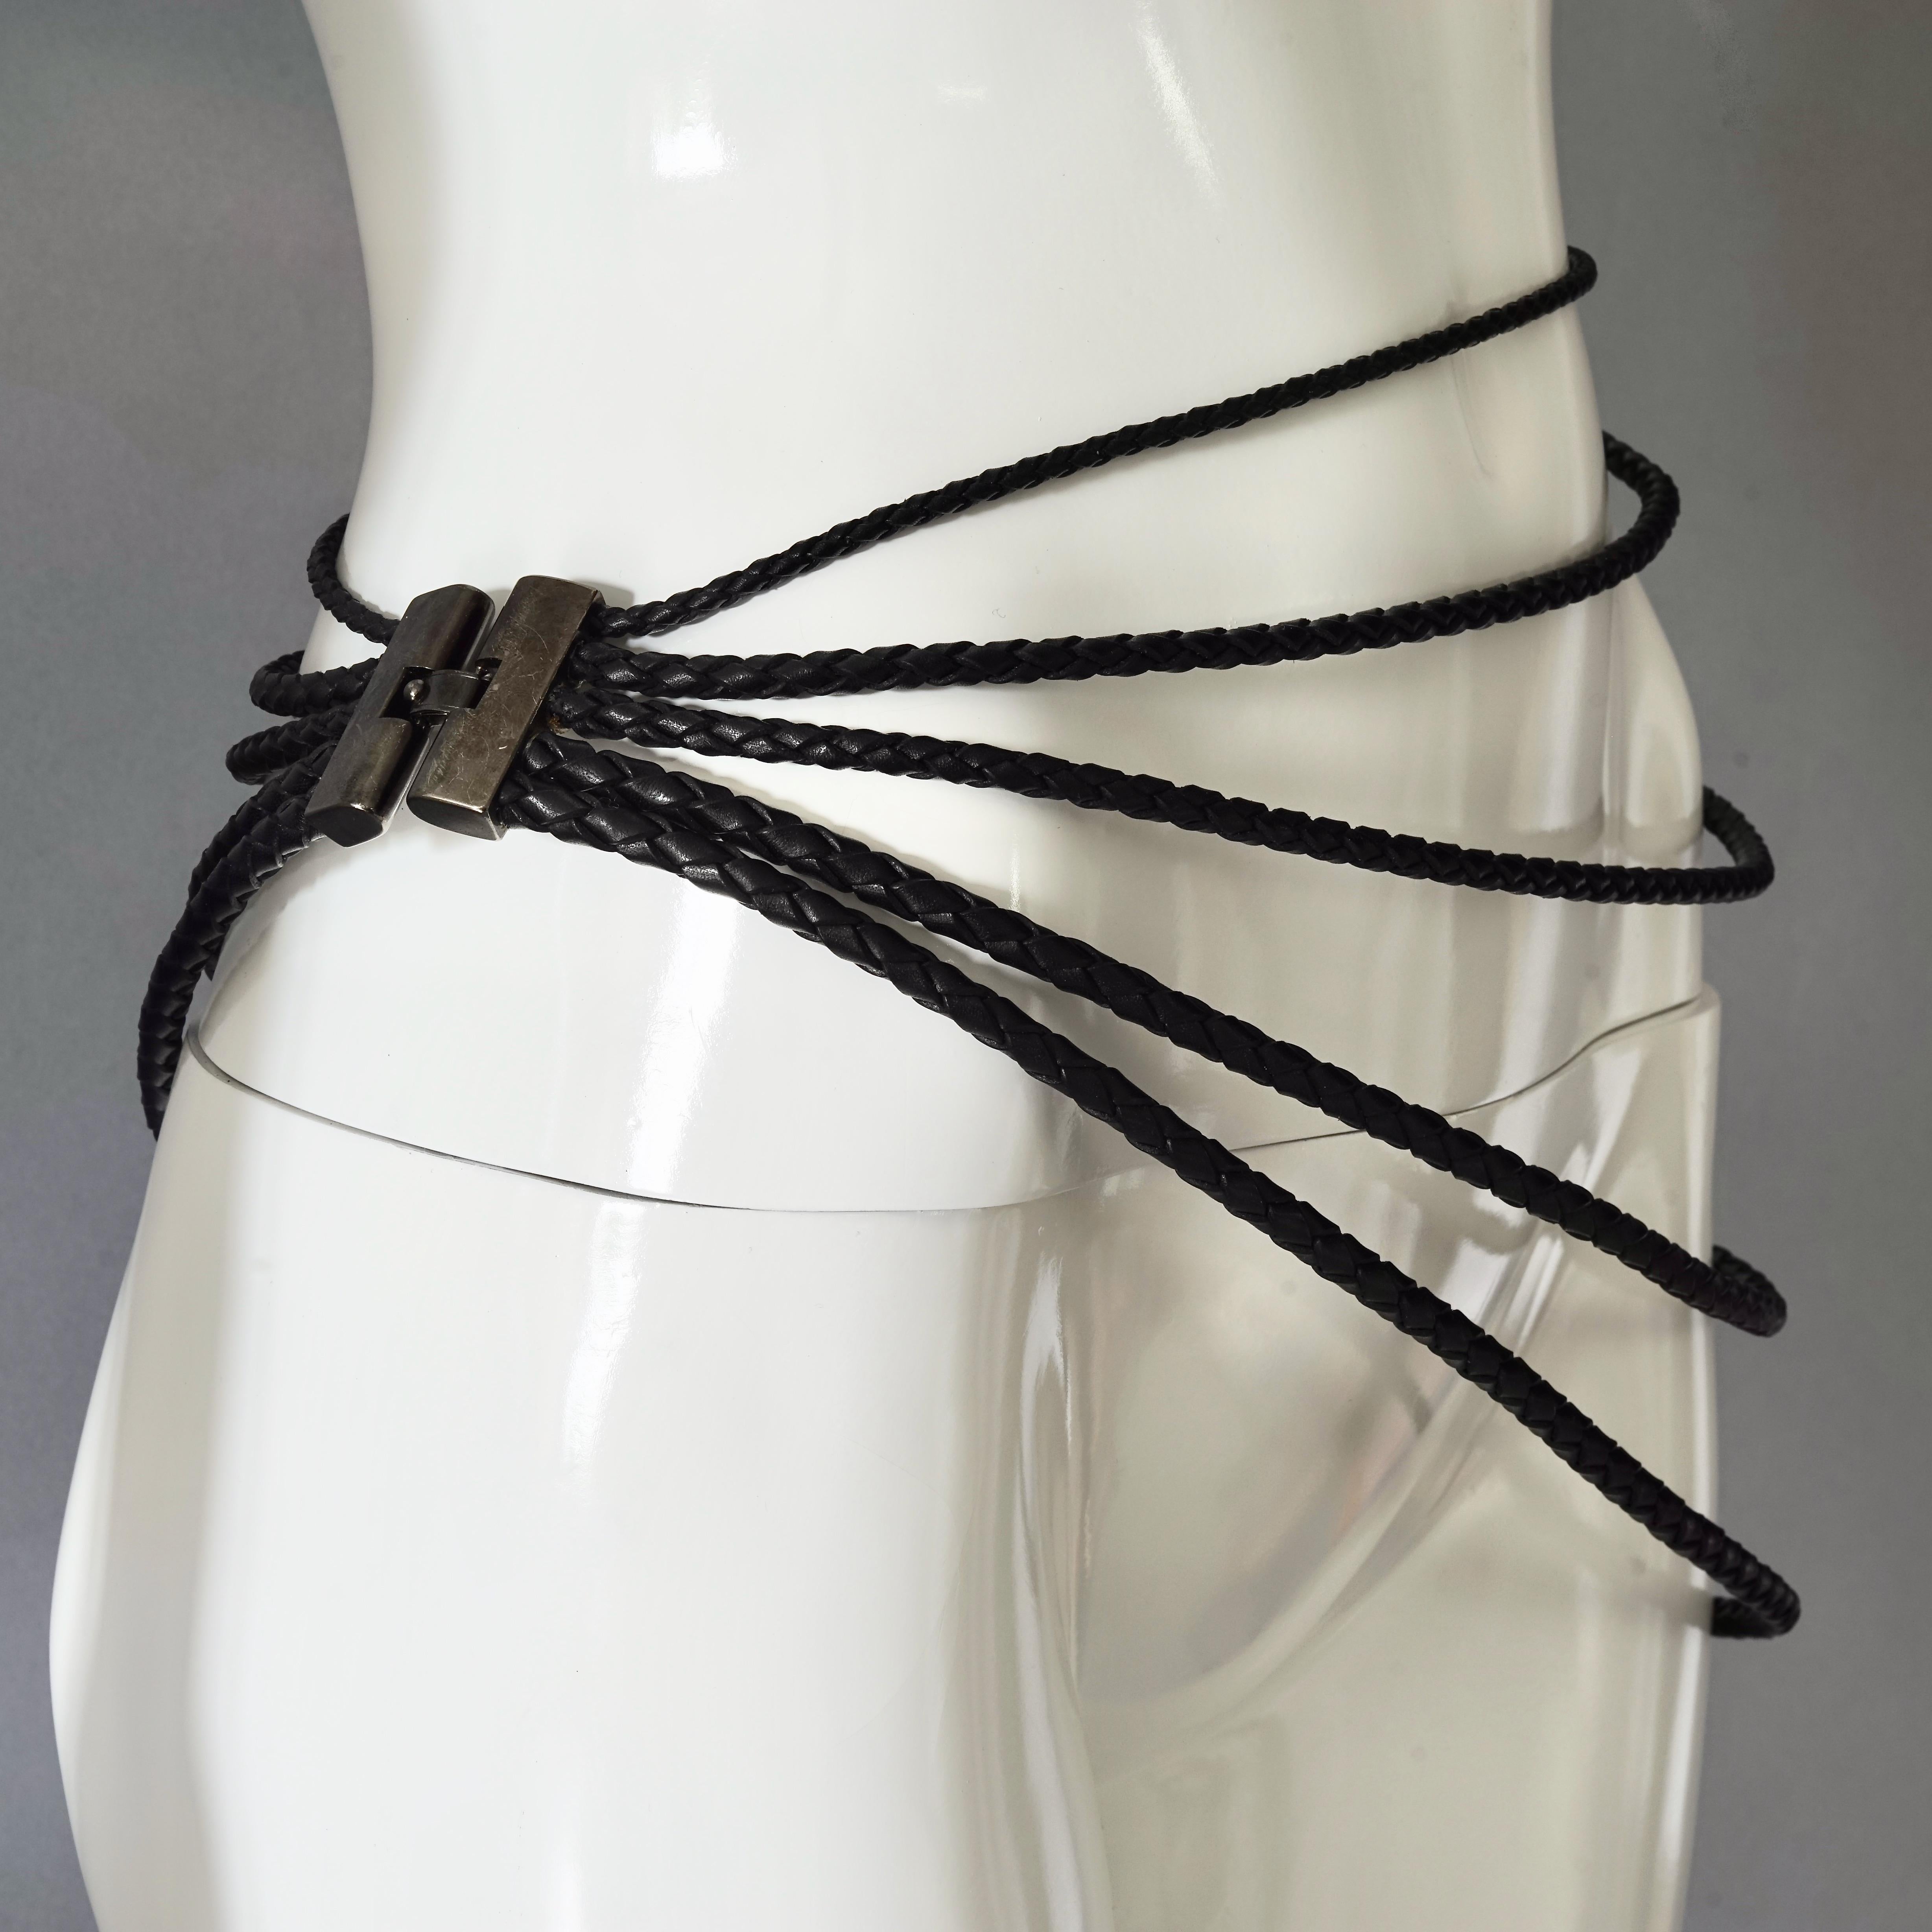 Vintage JEAN PAUL GAULTIER Multi Layer Braided Leather Necklace Belt

Measurements:
Height: 7.08 inches (18 cm)
Wearable Length: 26.37 inches to 40.15 inches (67 cm)

Features:
- 100% Authentic JEAN PAUL GAULTIER.
- 5 Layers of braided black leather